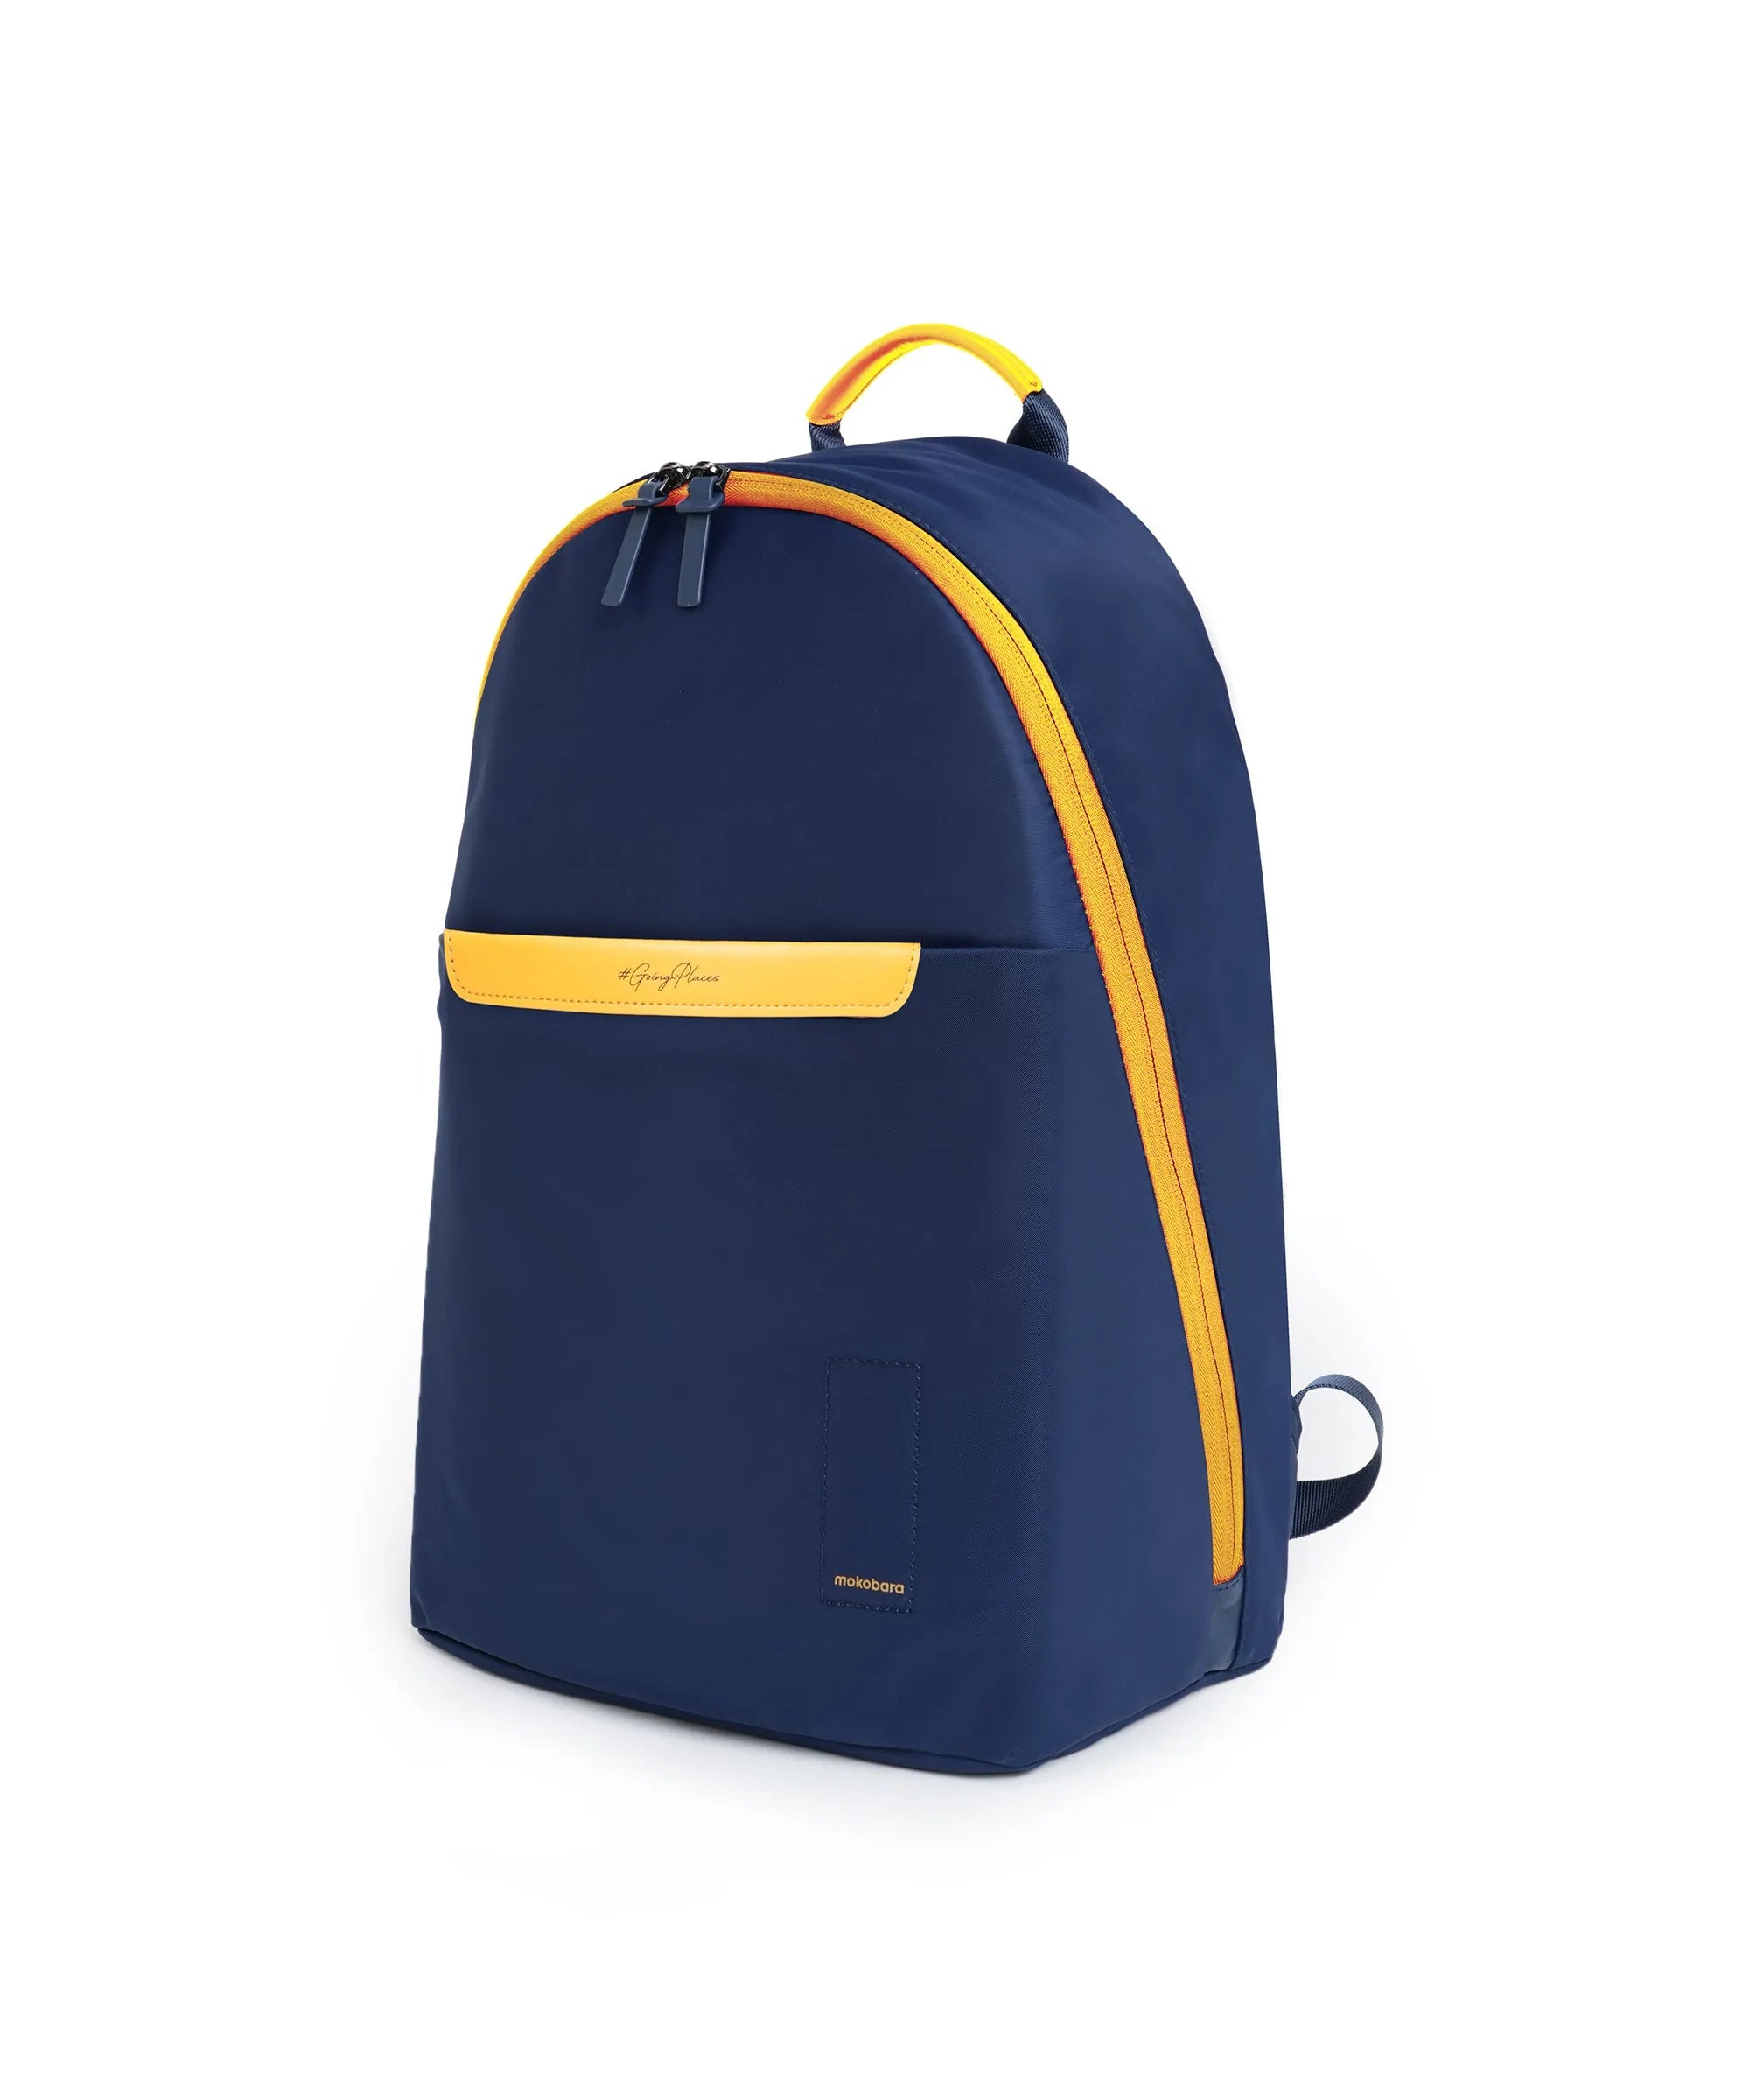 What Are The Straps On The Outside of a Backpack For? 